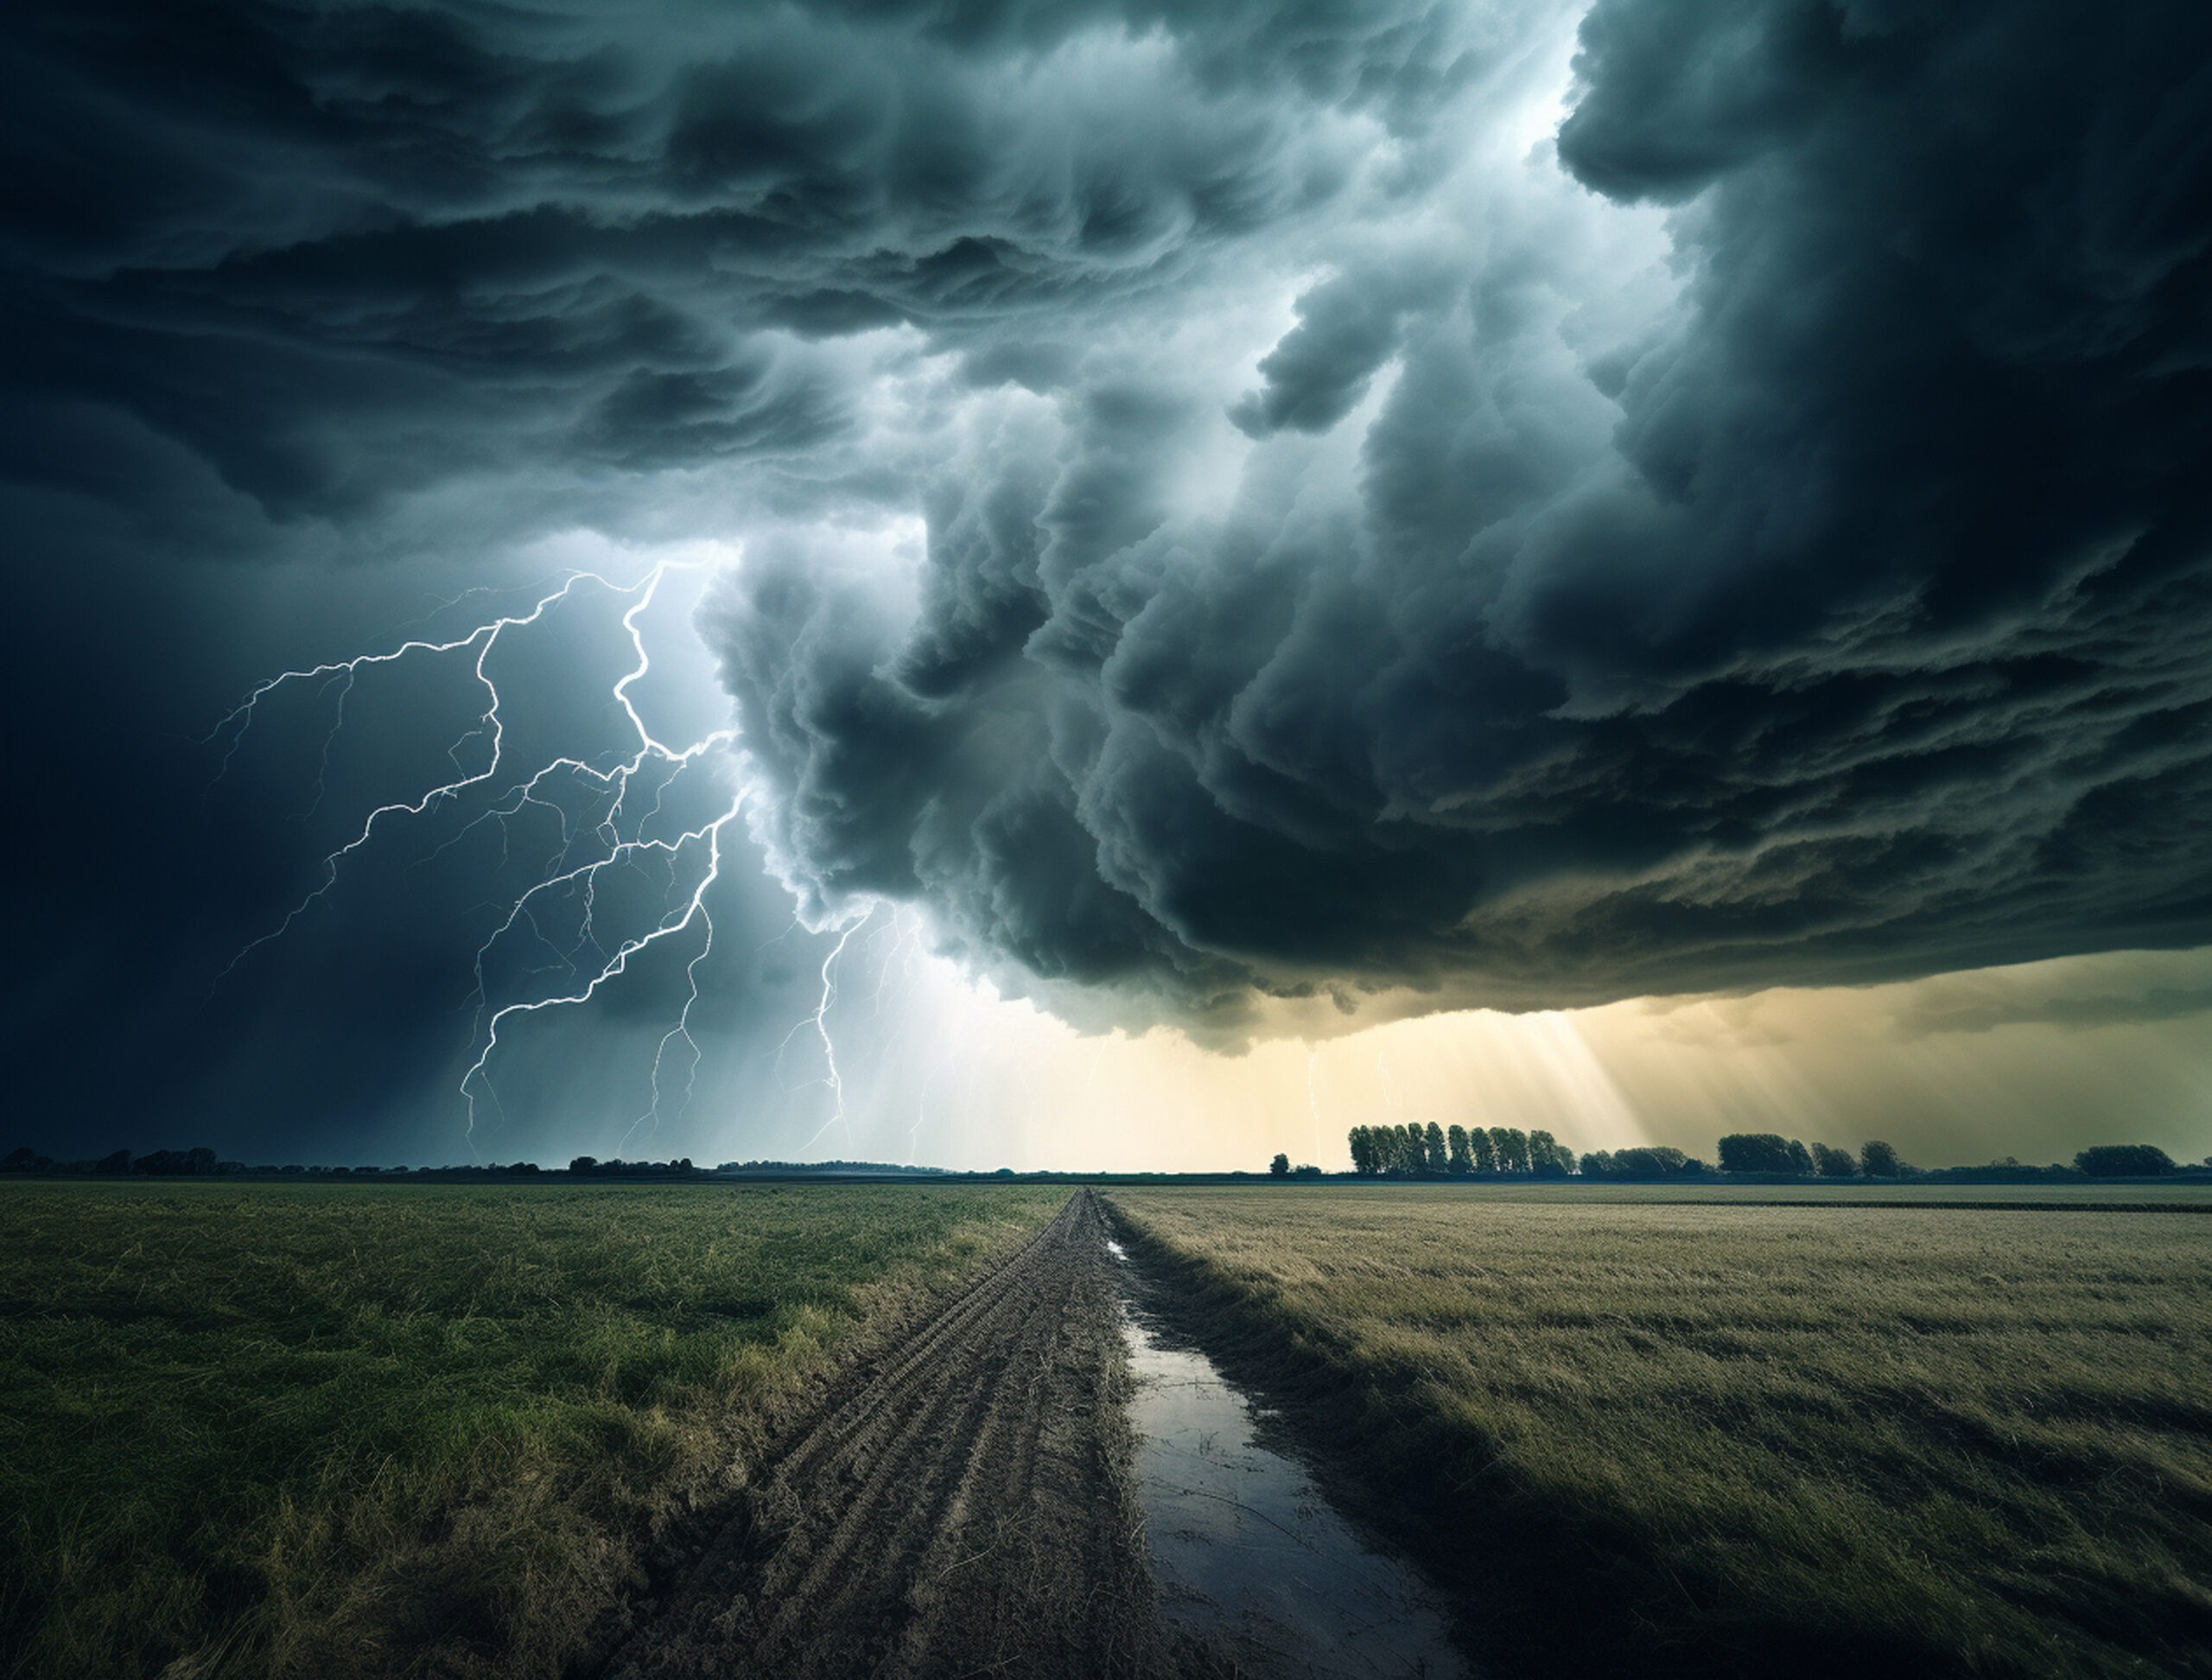 Preparing your home for a storm involves several steps to minimize damage and ensure safety. Here's a comprehensive guide